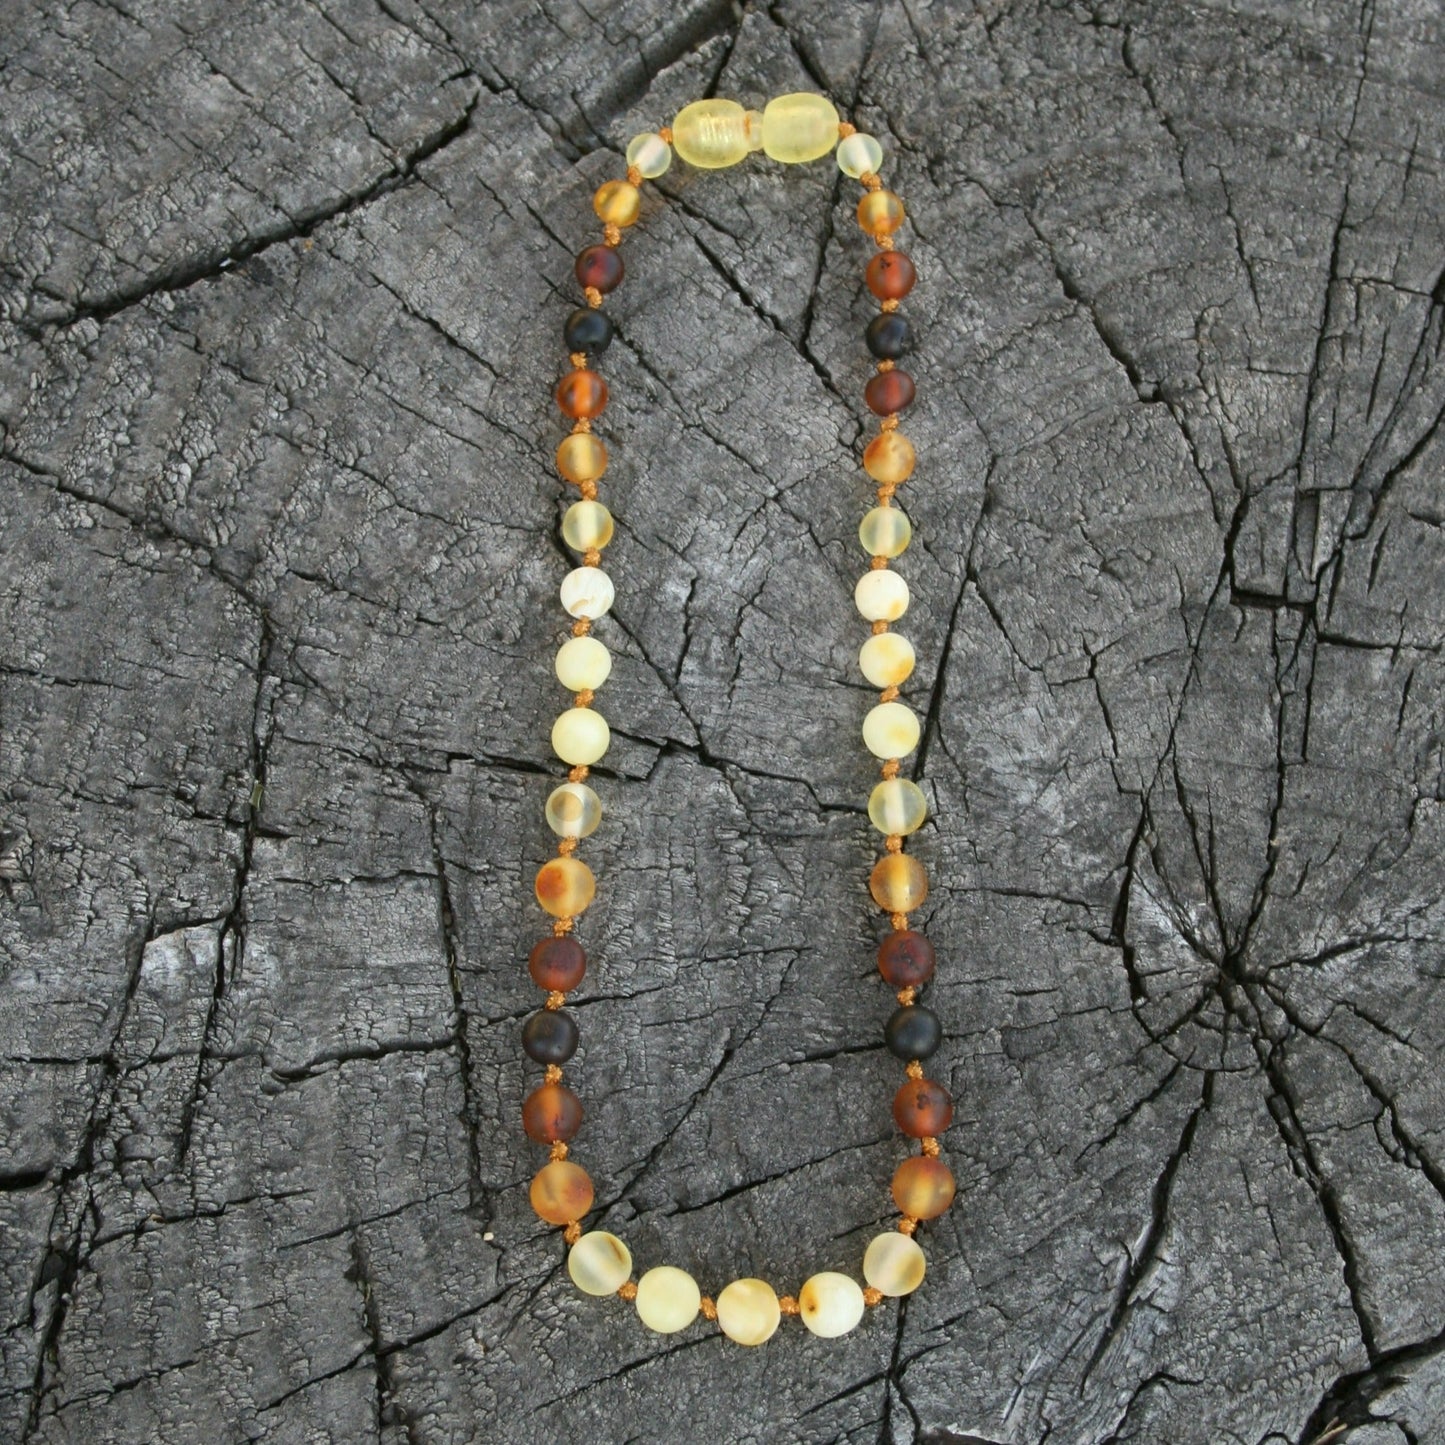 This listing is for any length of round sunrise style Baltic amber jewelry starting at a 4" bracelet all of the way up to a 25" necklace. Longer options are available with our belly chain listing. Everything is strung on nylon cord and hand knotted between each bead. (Jewelry on wooden background)